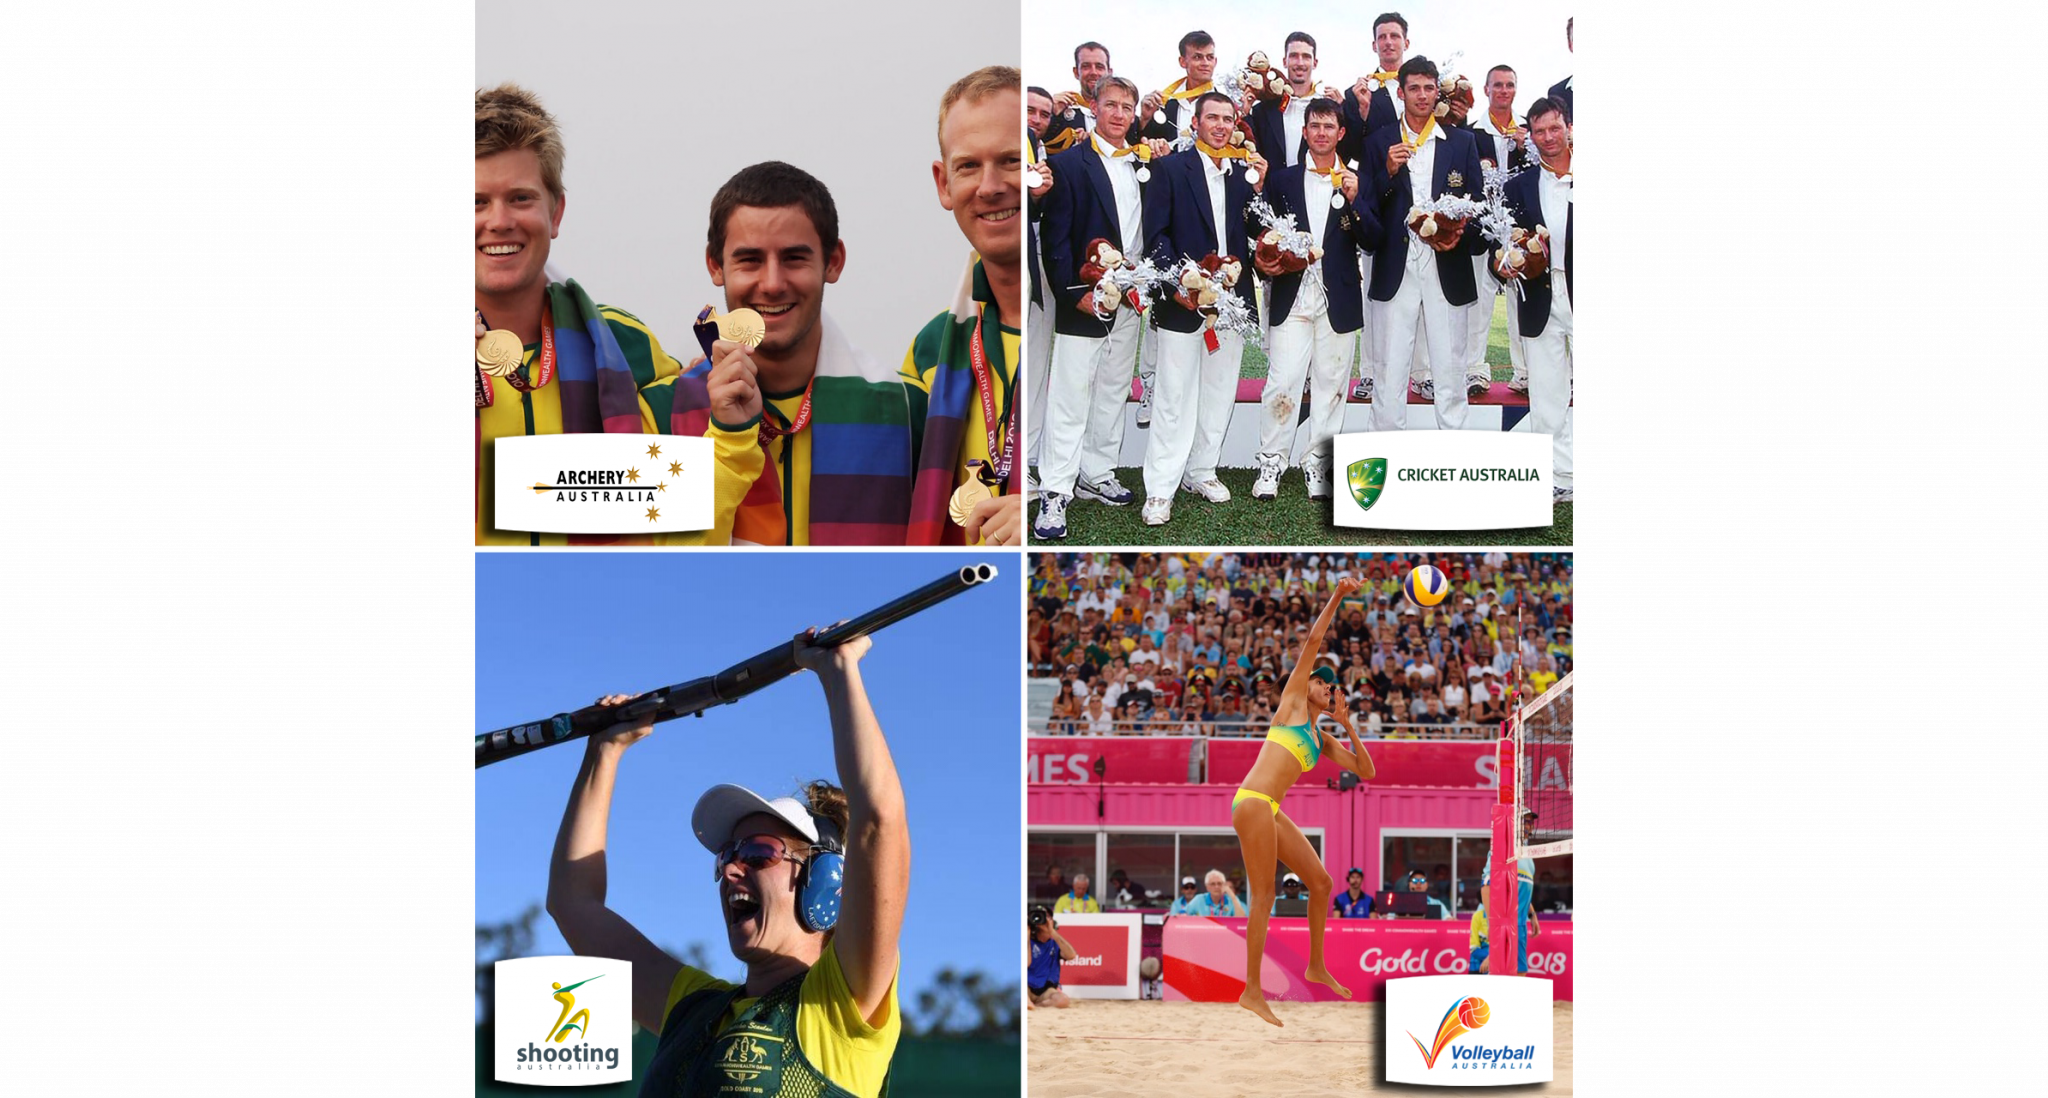 Archery, cricket, shooting and volleyball have applied to be part of the Commonwealth Games programme at Birmingham 2022 and have been accepted as associate members of Commonwealth Games Australia ©CGA